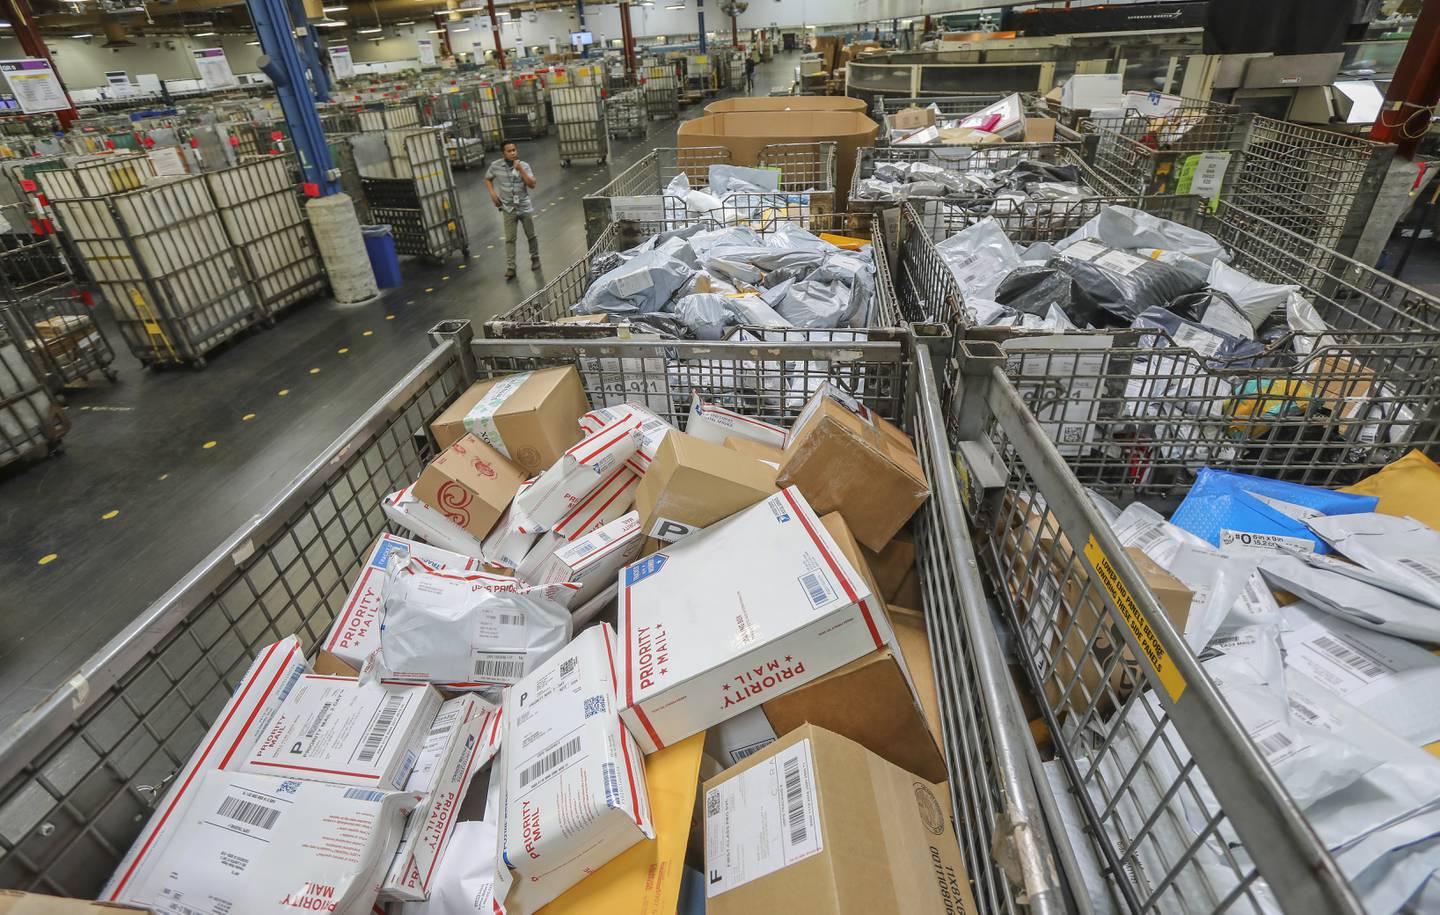 Packages increase at USPS/Packages with food in them are rotting due to slowed postal delivery times